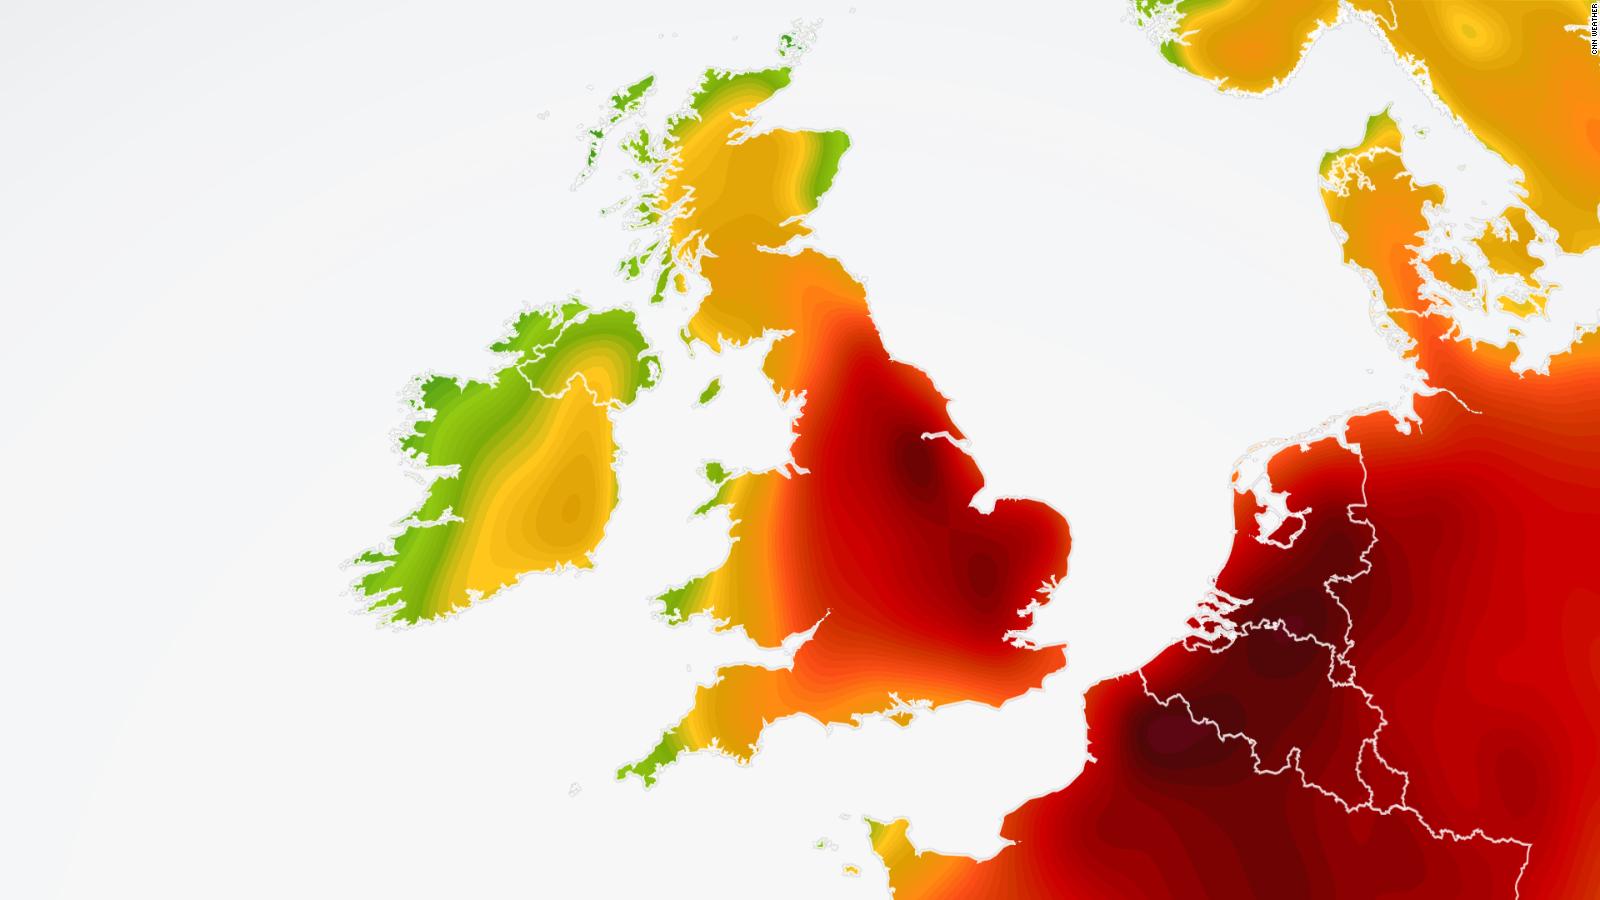 UK will reach projected temperatures by 2050 (Analysis)